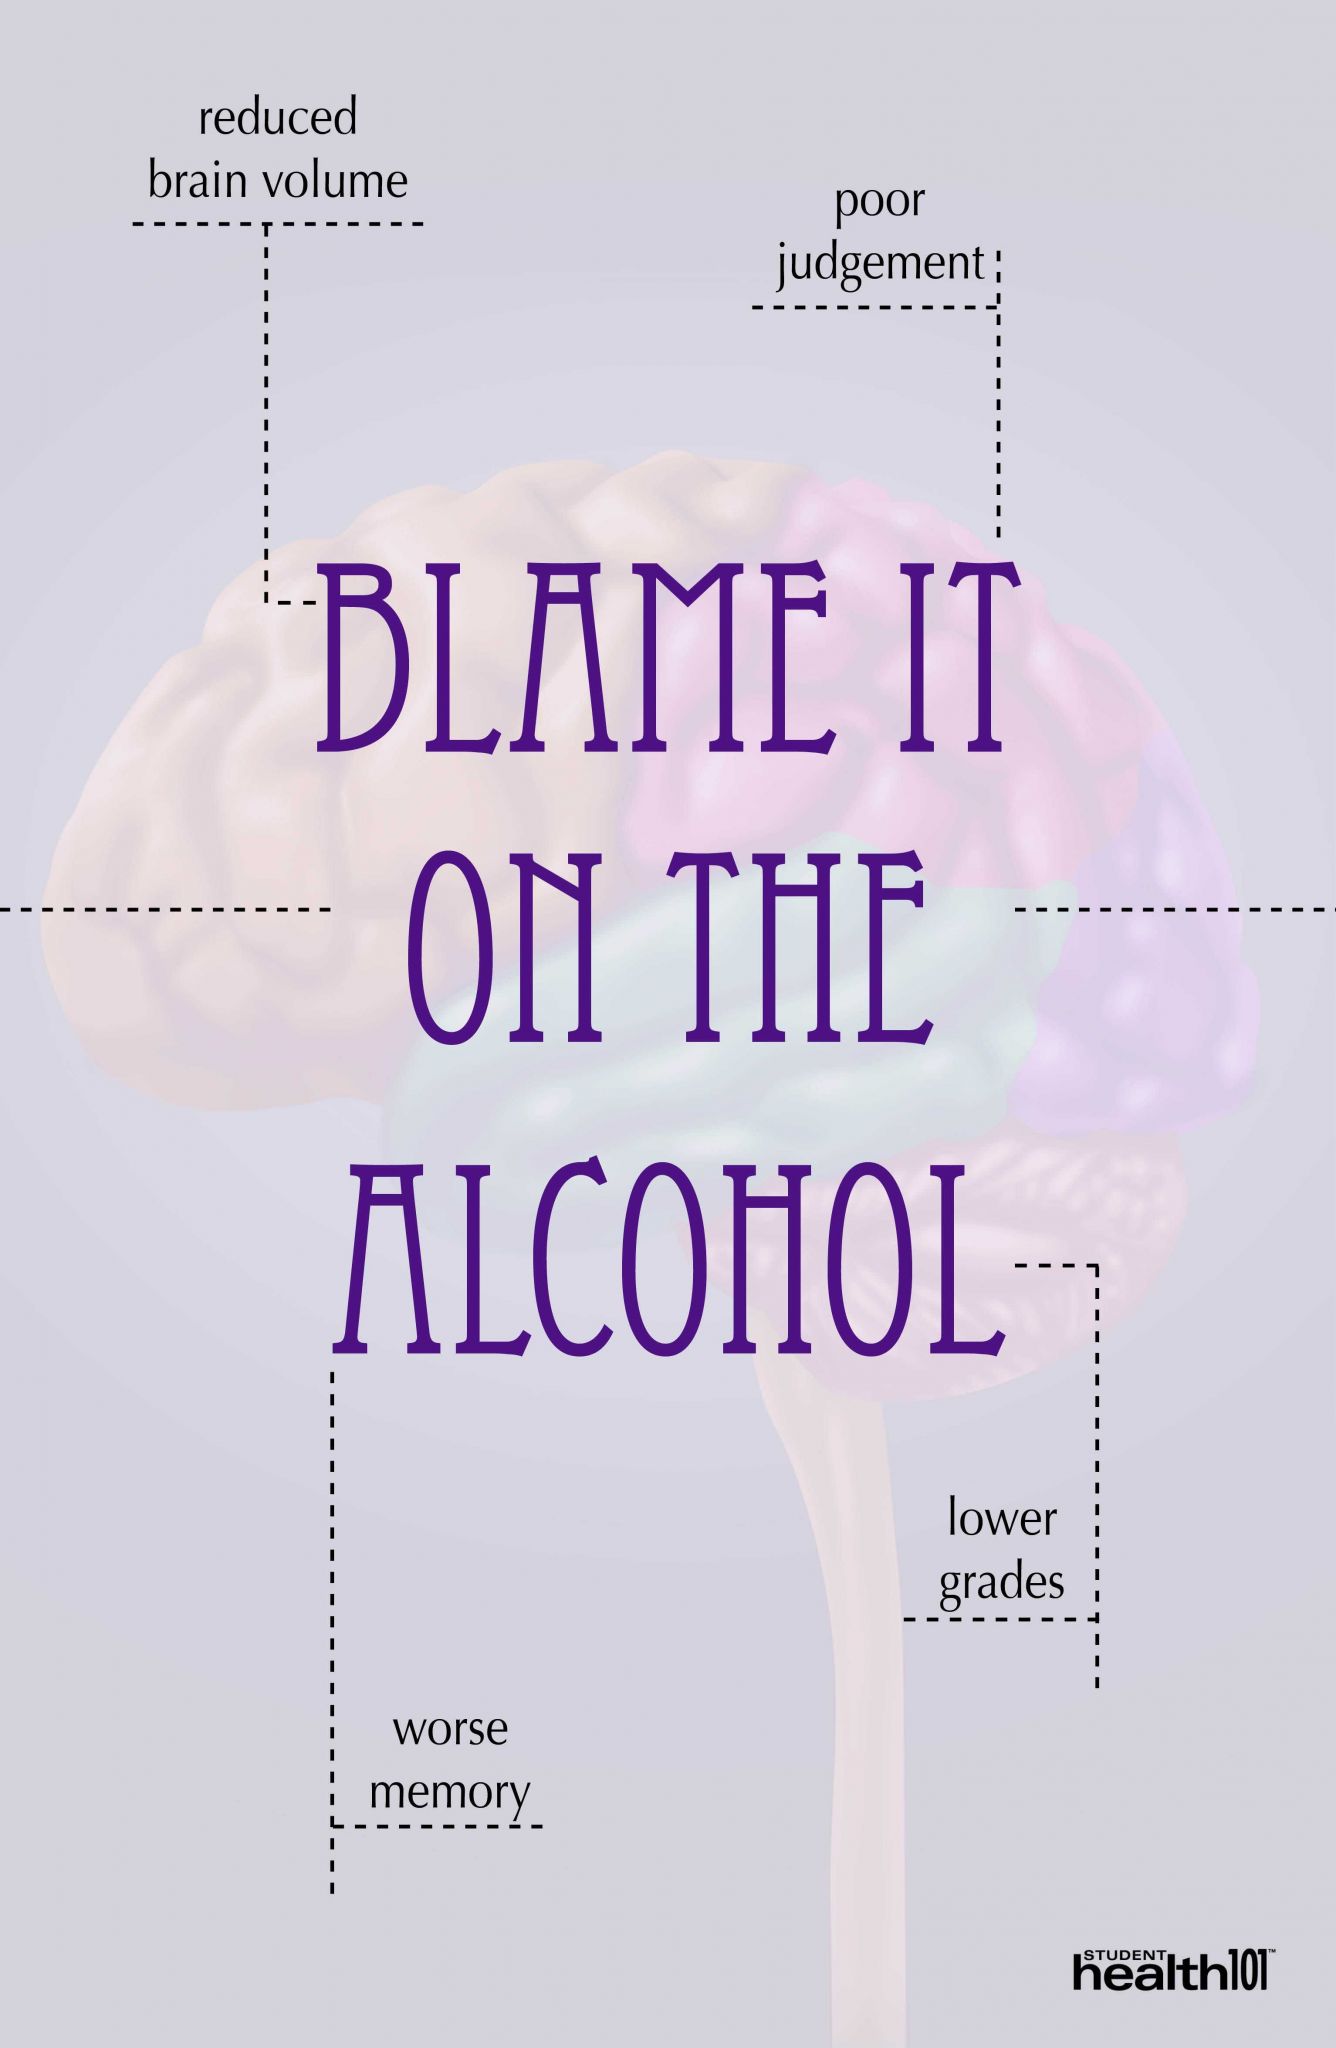 Brain Wrinkles Worksheets as Well as Alcohol and Your Brain Memory Grades